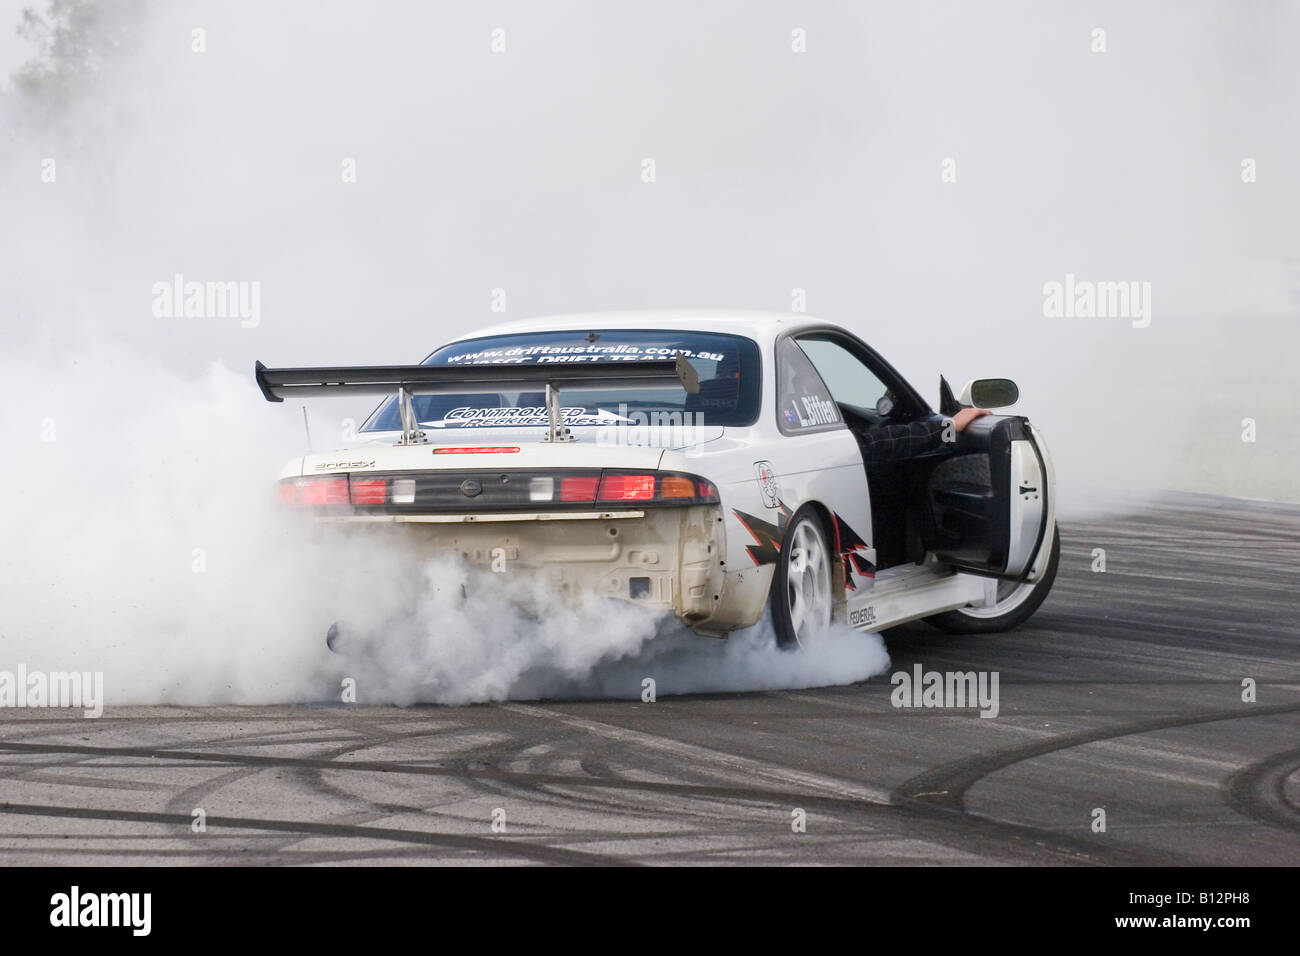 Australian Drift Motorsport competitor performs a celebration burnout in his modified Nissan 200SX after winning a Drift event Stock Photo